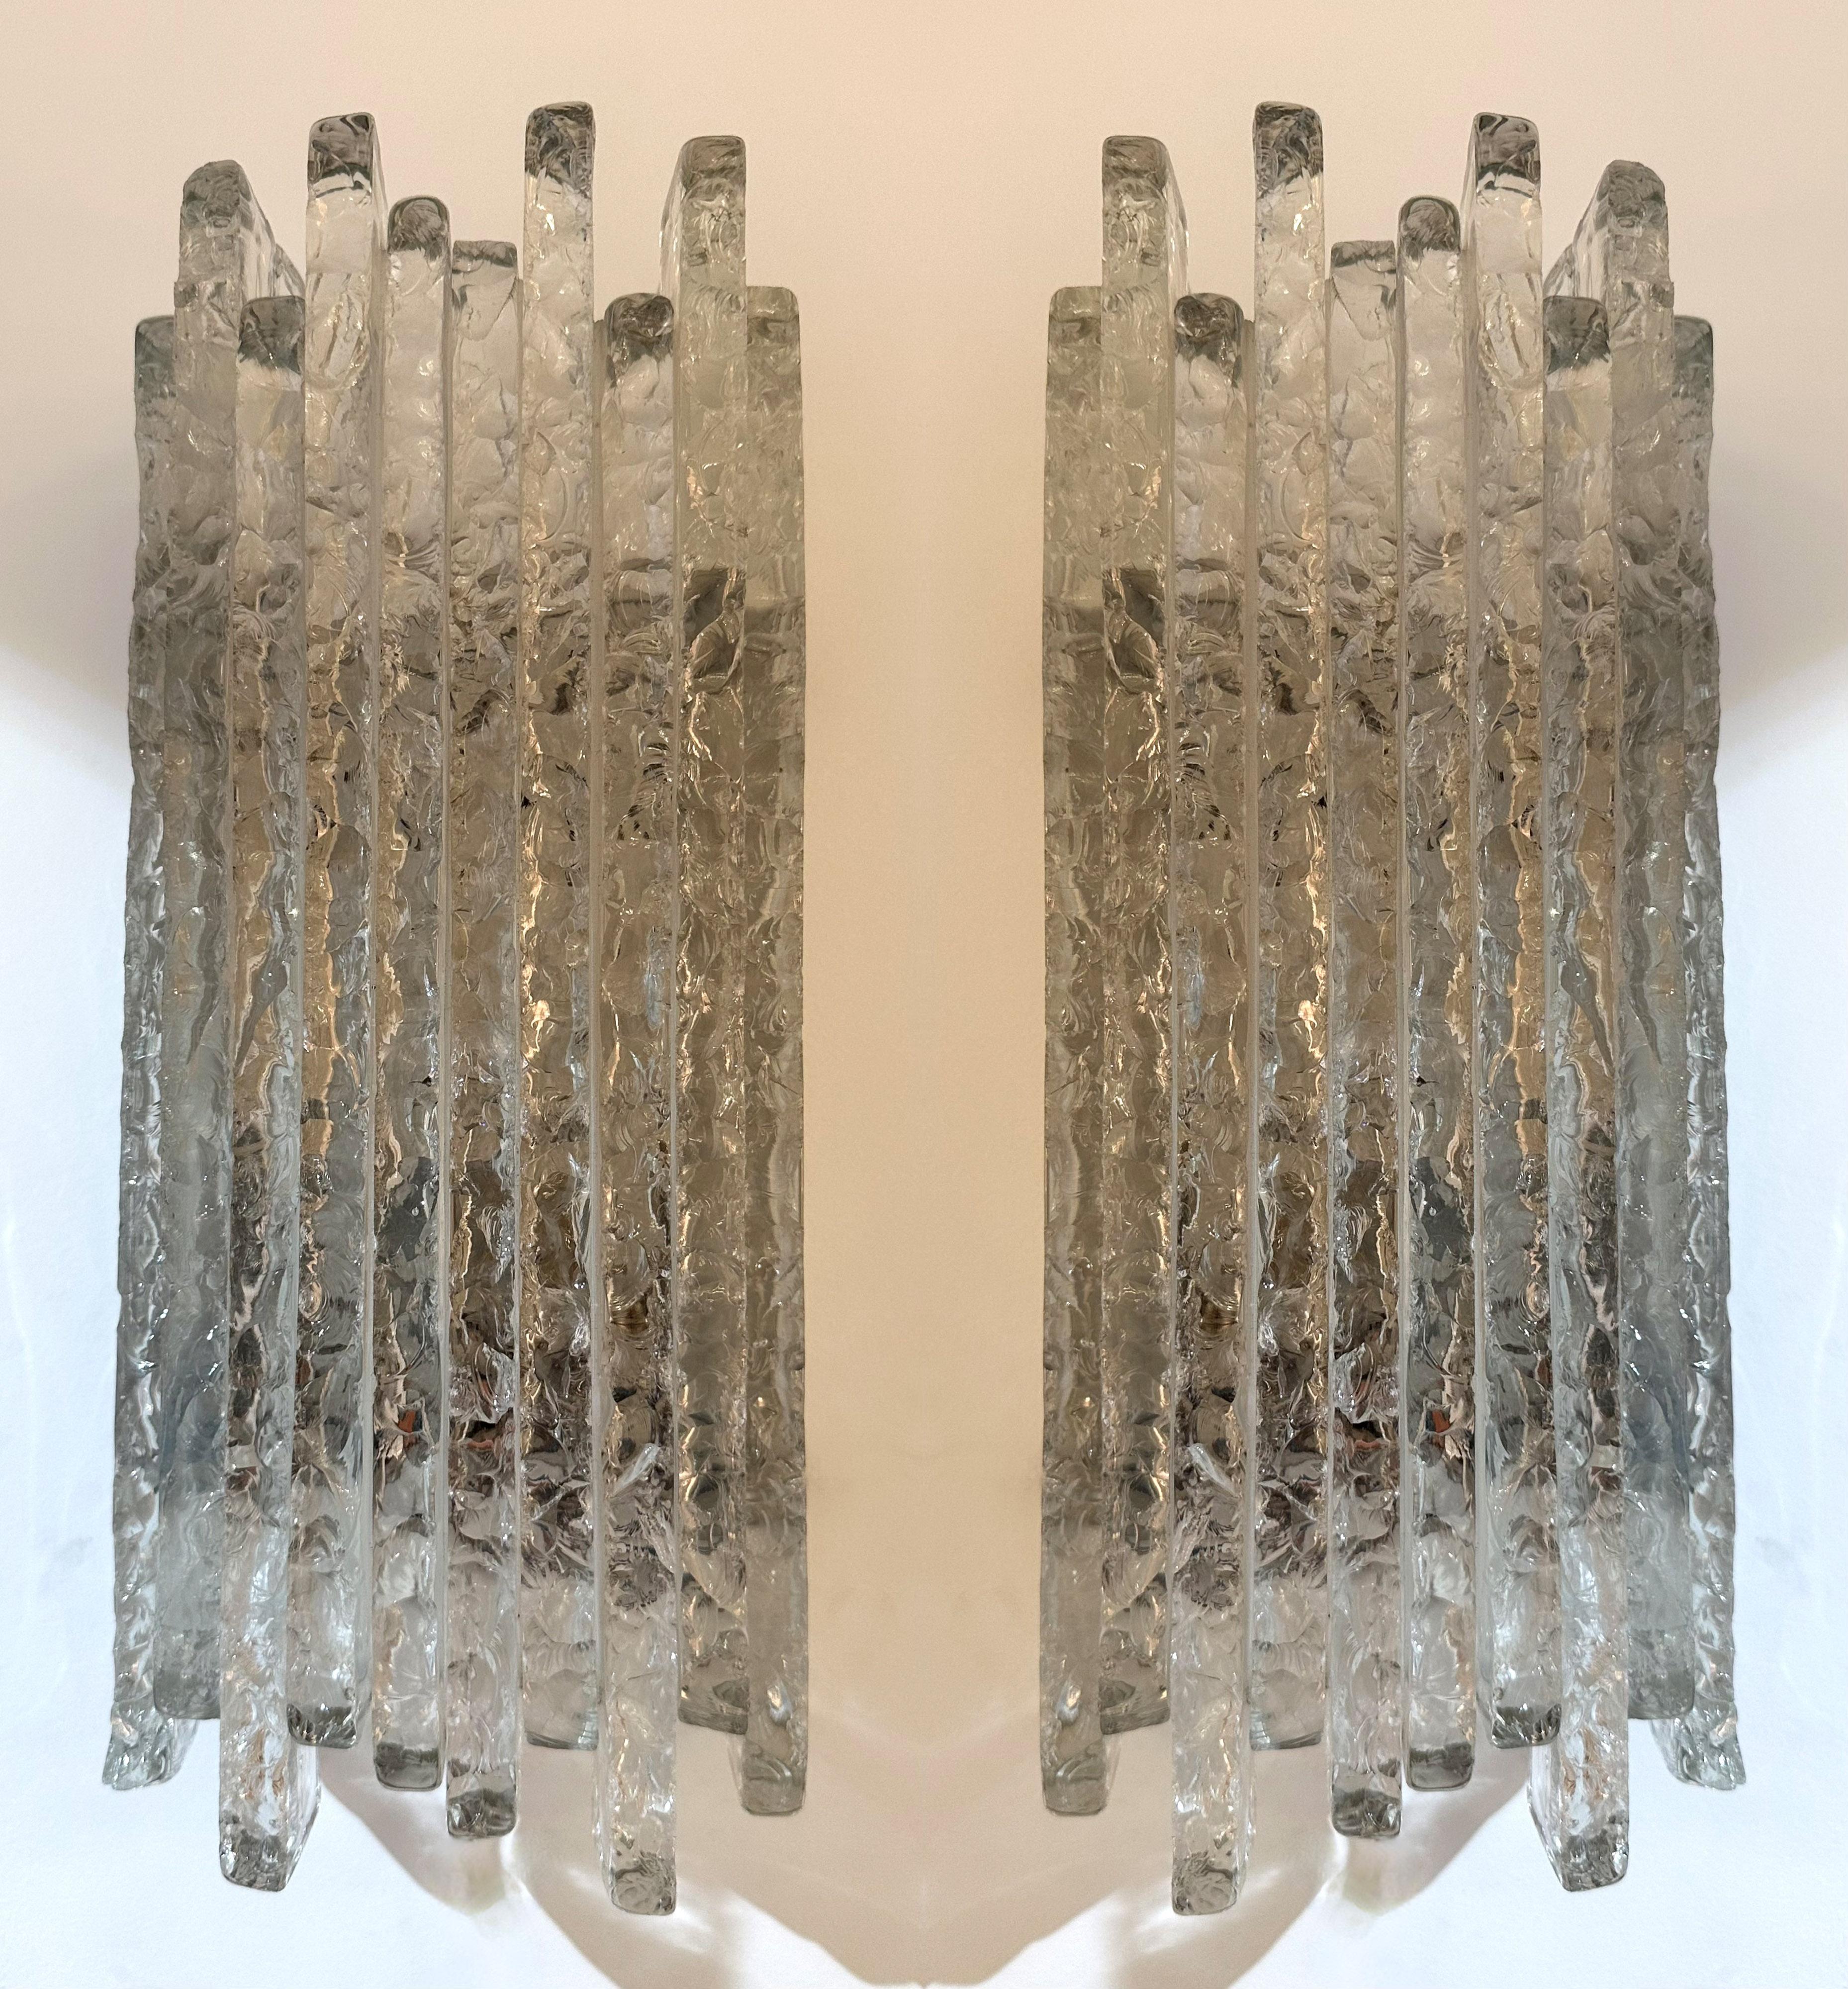 Pair of Hammered Glass Ice Sconces by Poliarte, Italy, 1970s For Sale 2